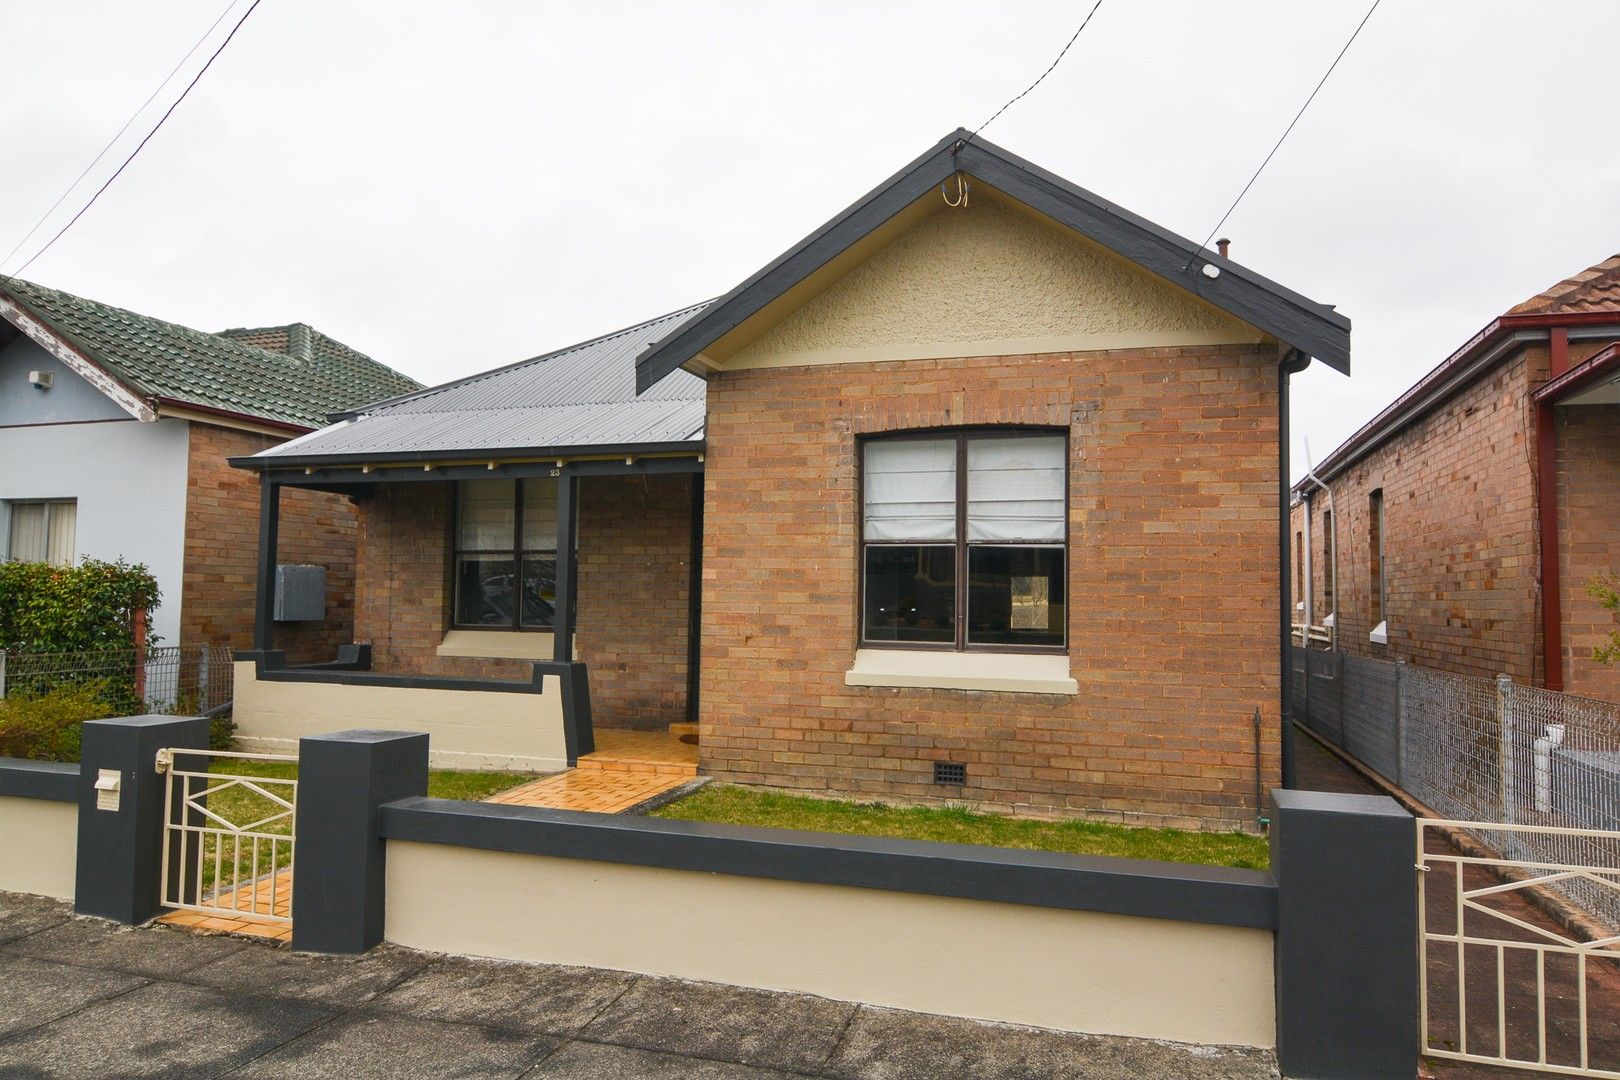 3 bedrooms House in 23 Academy Street LITHGOW NSW, 2790